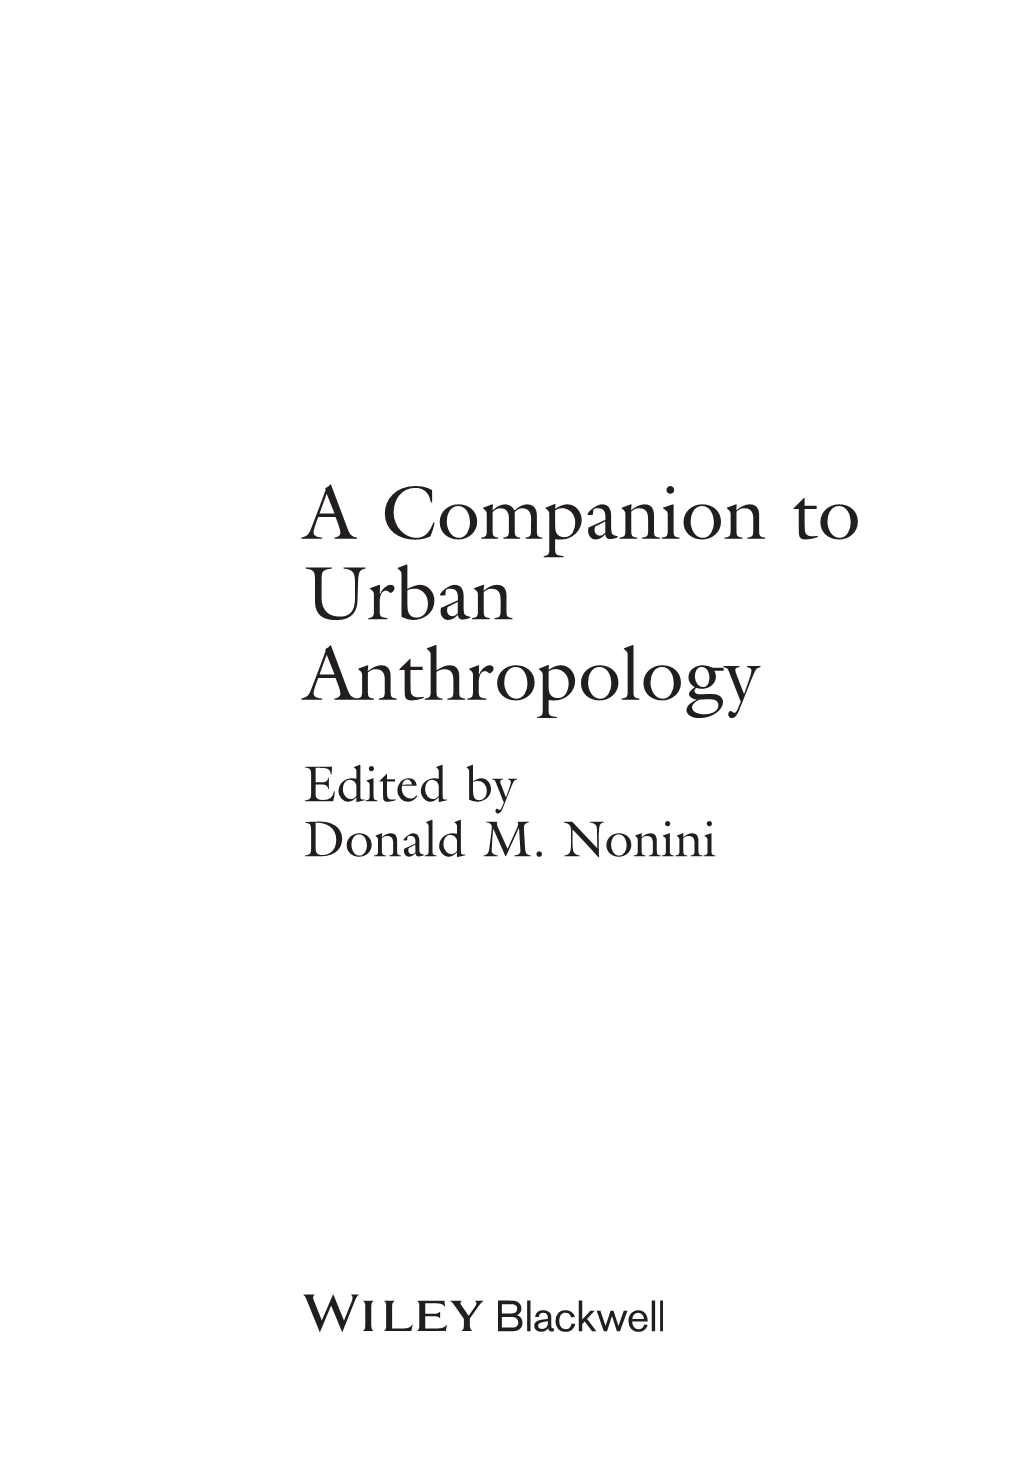 Companion to Urban Anthropology Edited by Donald M